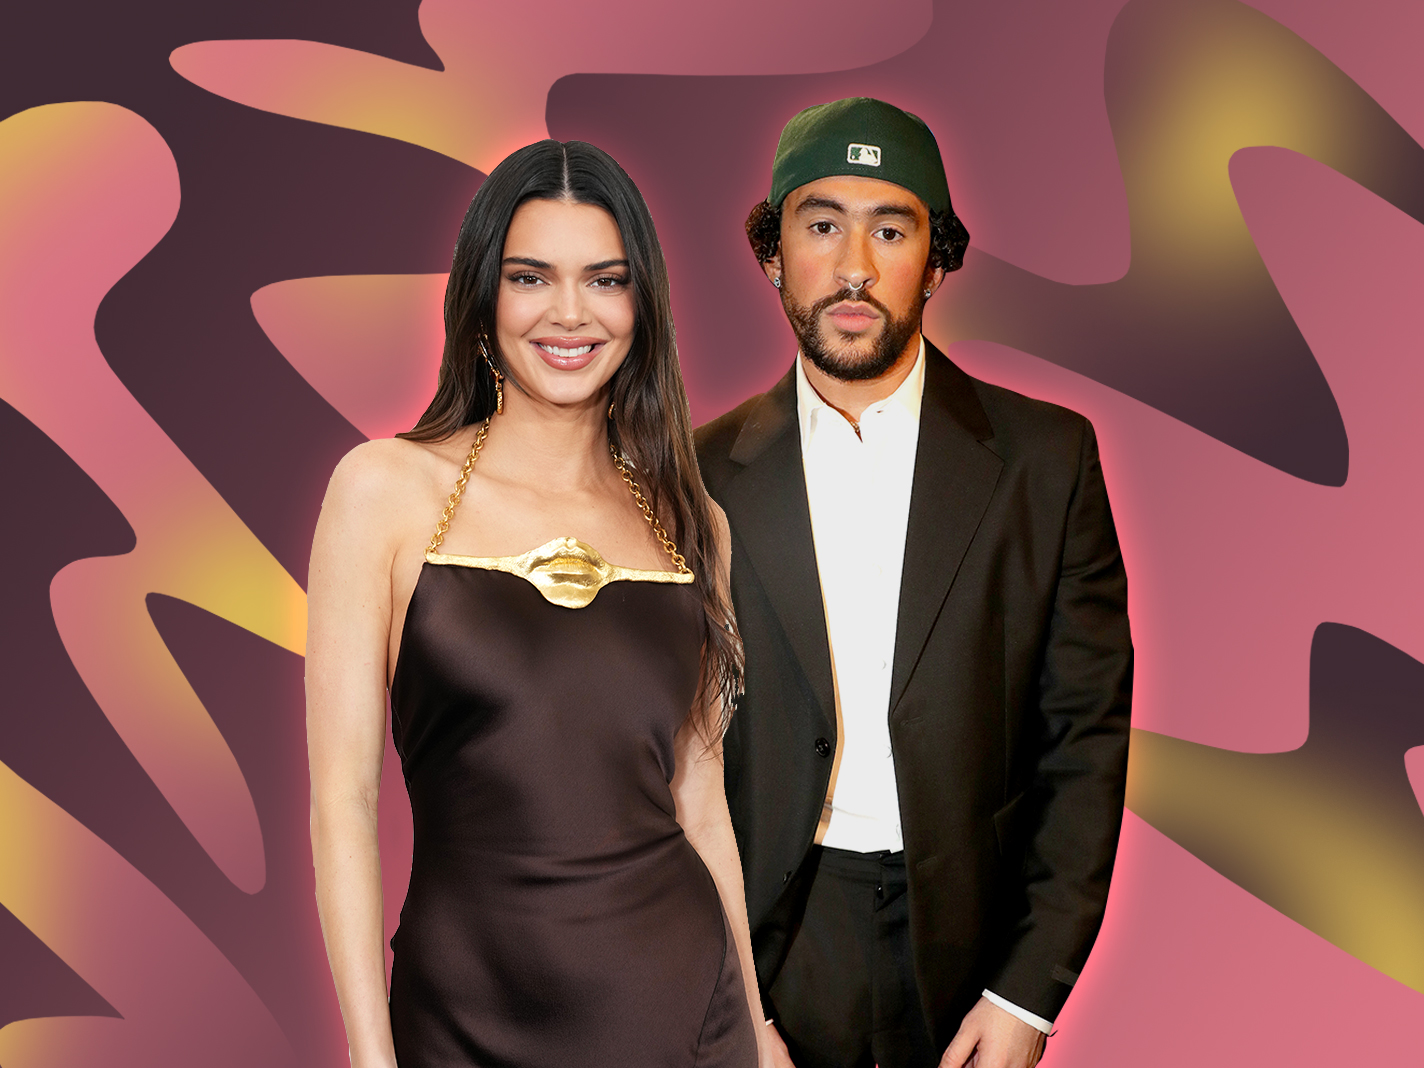 Bad Bunny & Kendall Jenner Go Instagram Official In Big Way